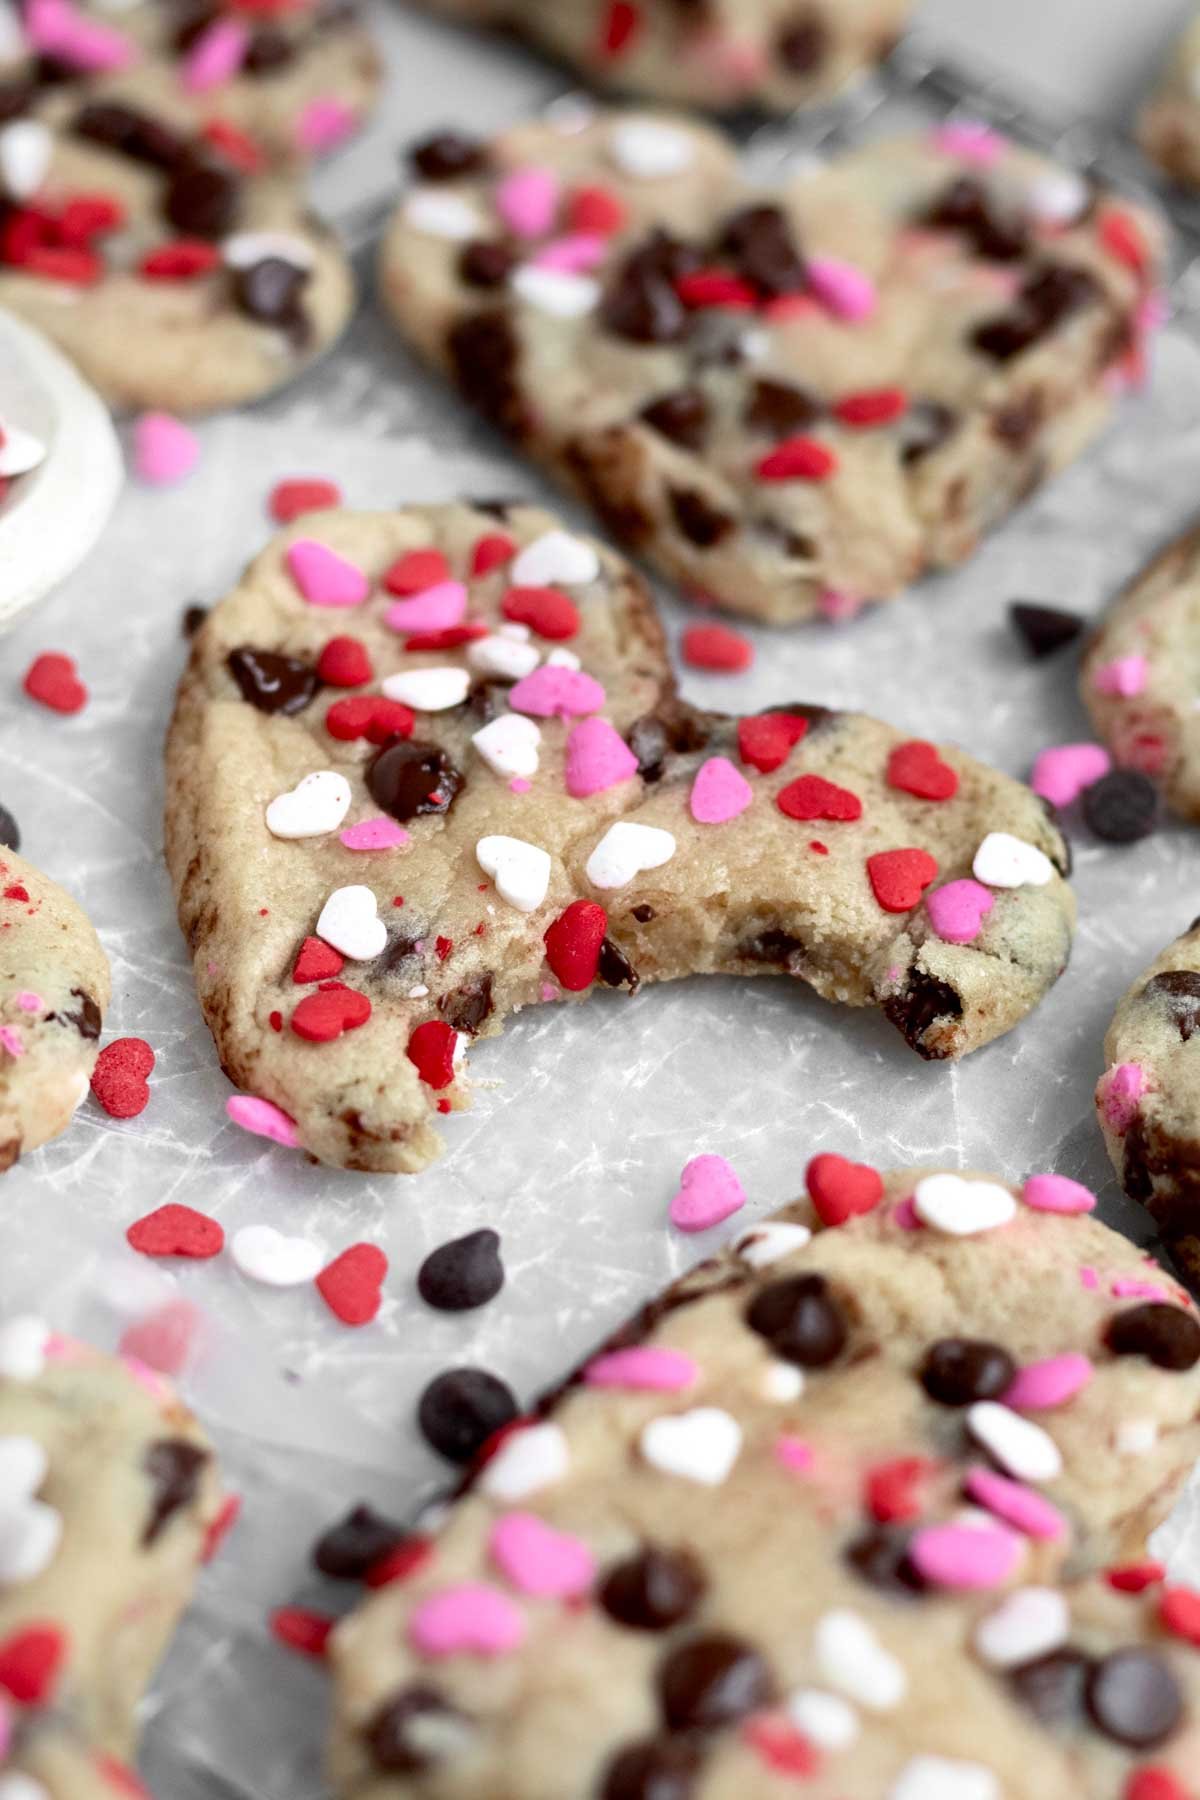 A bite in the soft Heart Shaped Chocolate Chip Cookie crunches through the heart sprinkles.